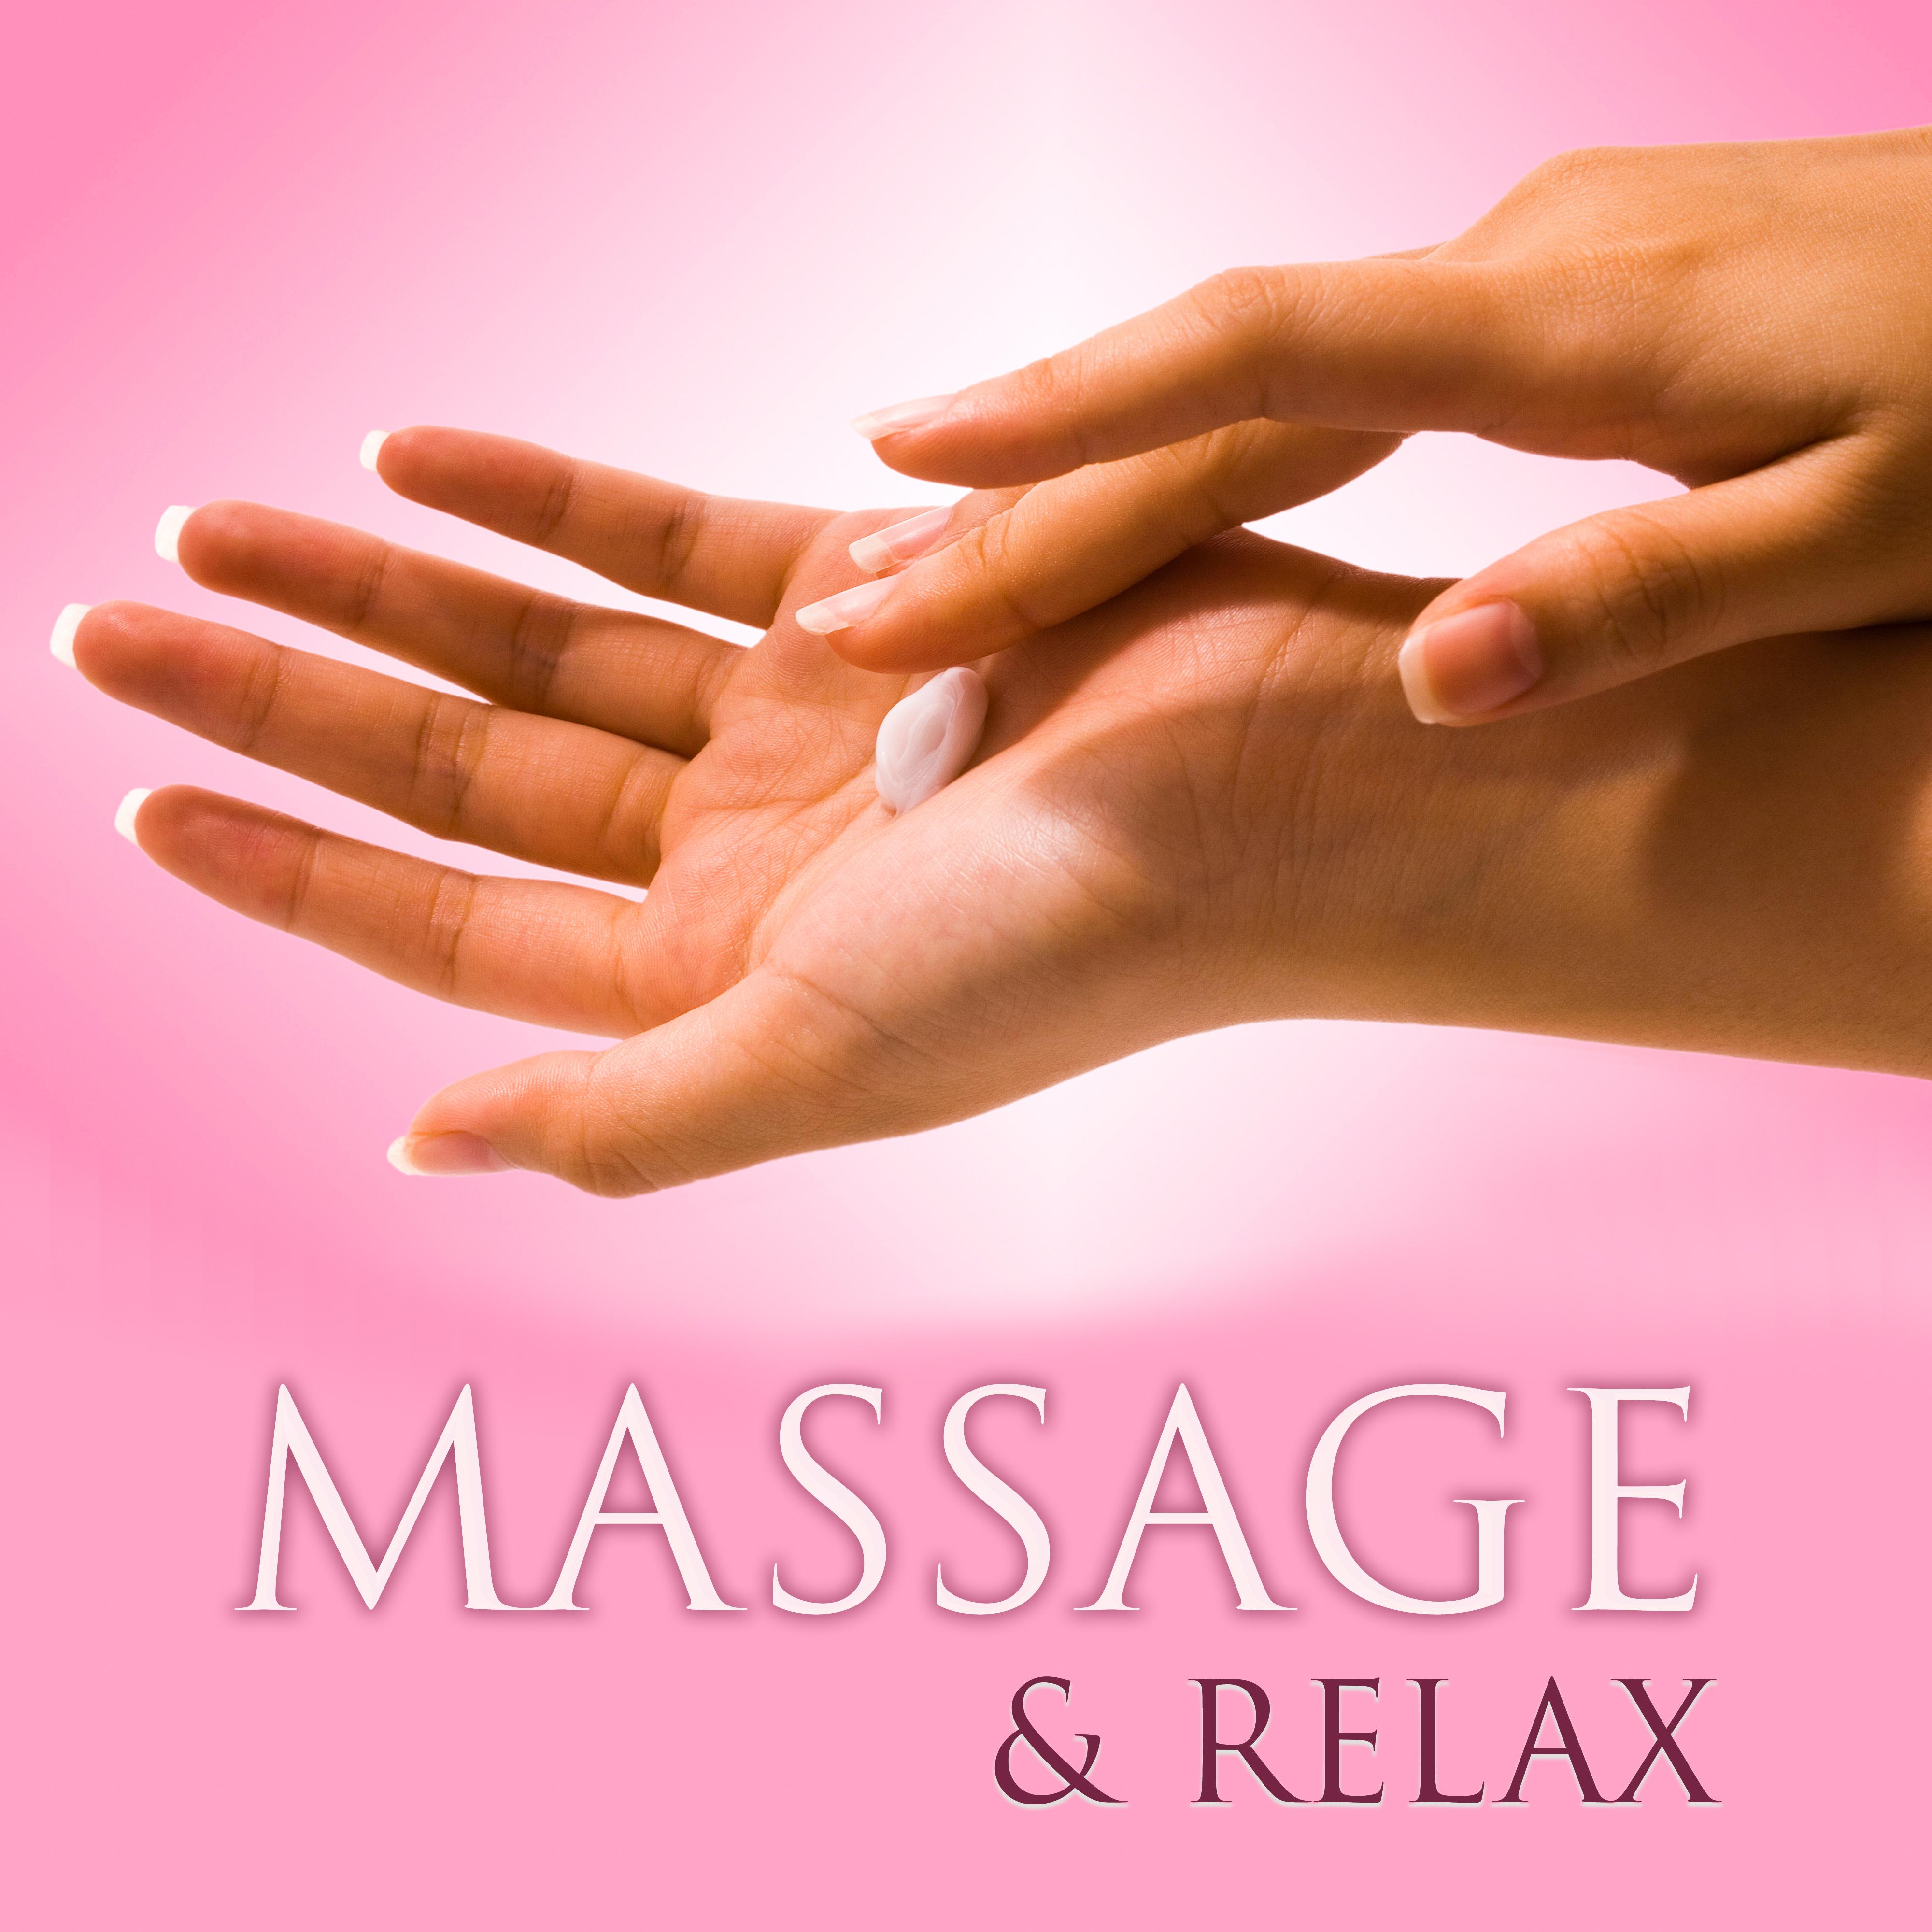 Massage & Relax – Delicate Sounds for Spa, Stress Relief, Reiki Music, Deep Sleep, Meditation, Zen Music to Calm Down